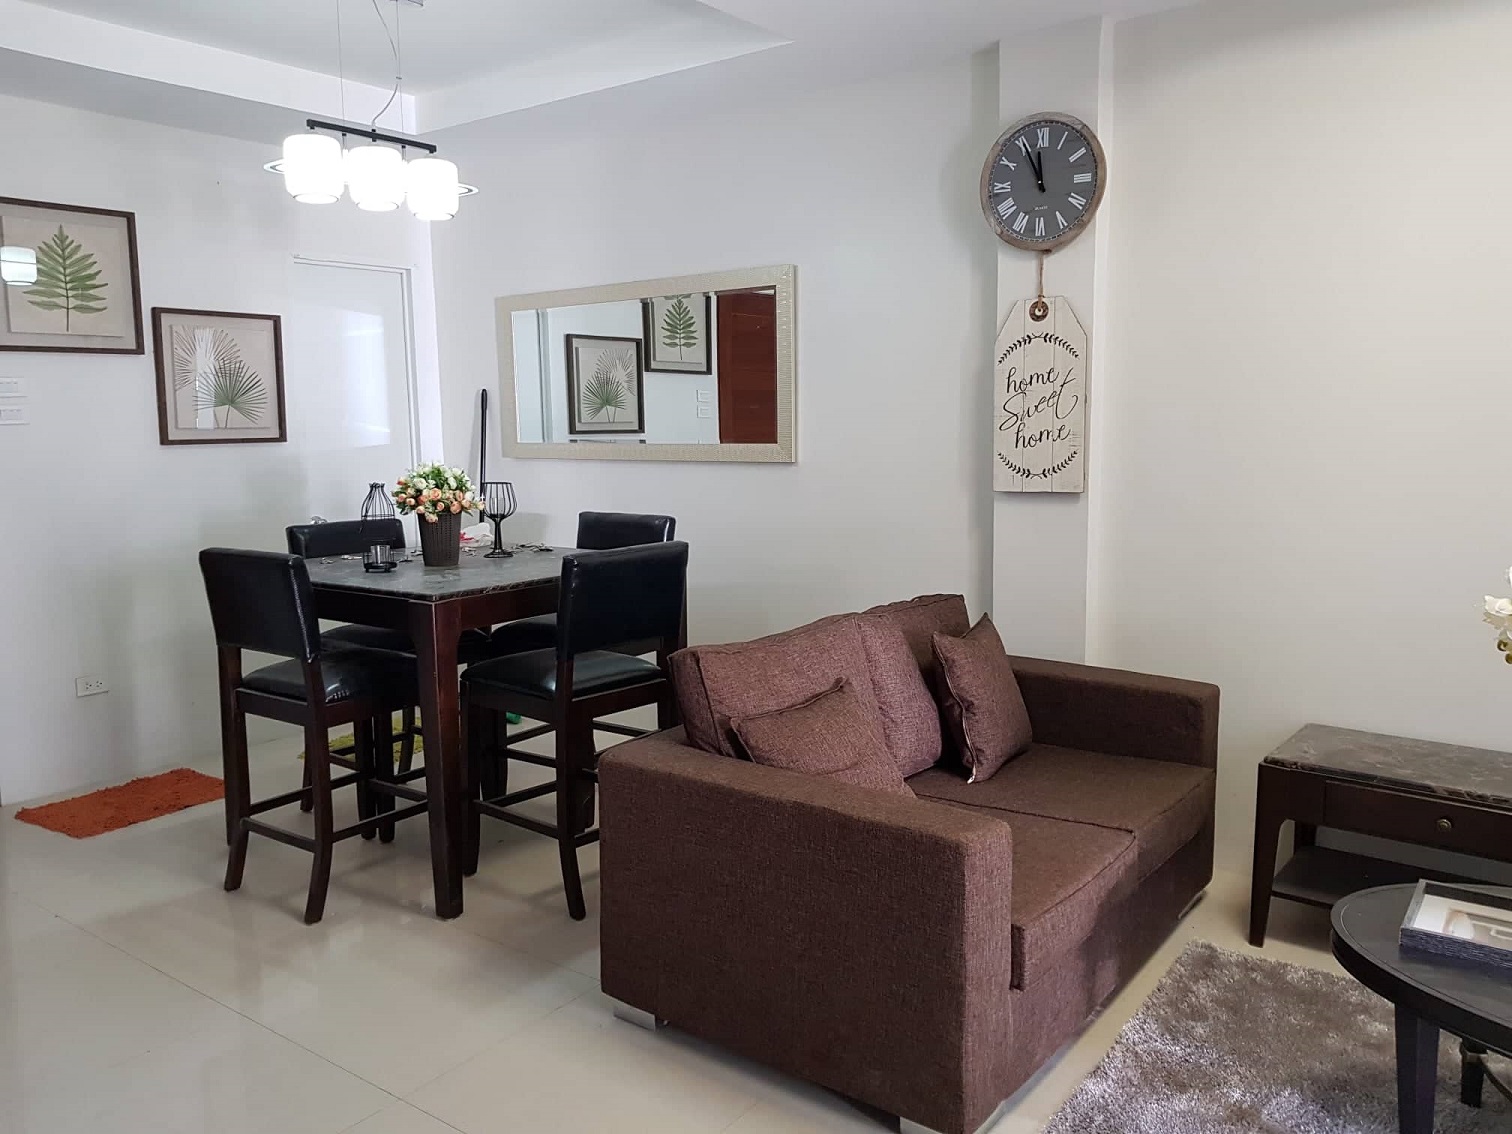 5-single-attached-and-2-duplex-house-located-in-talisay